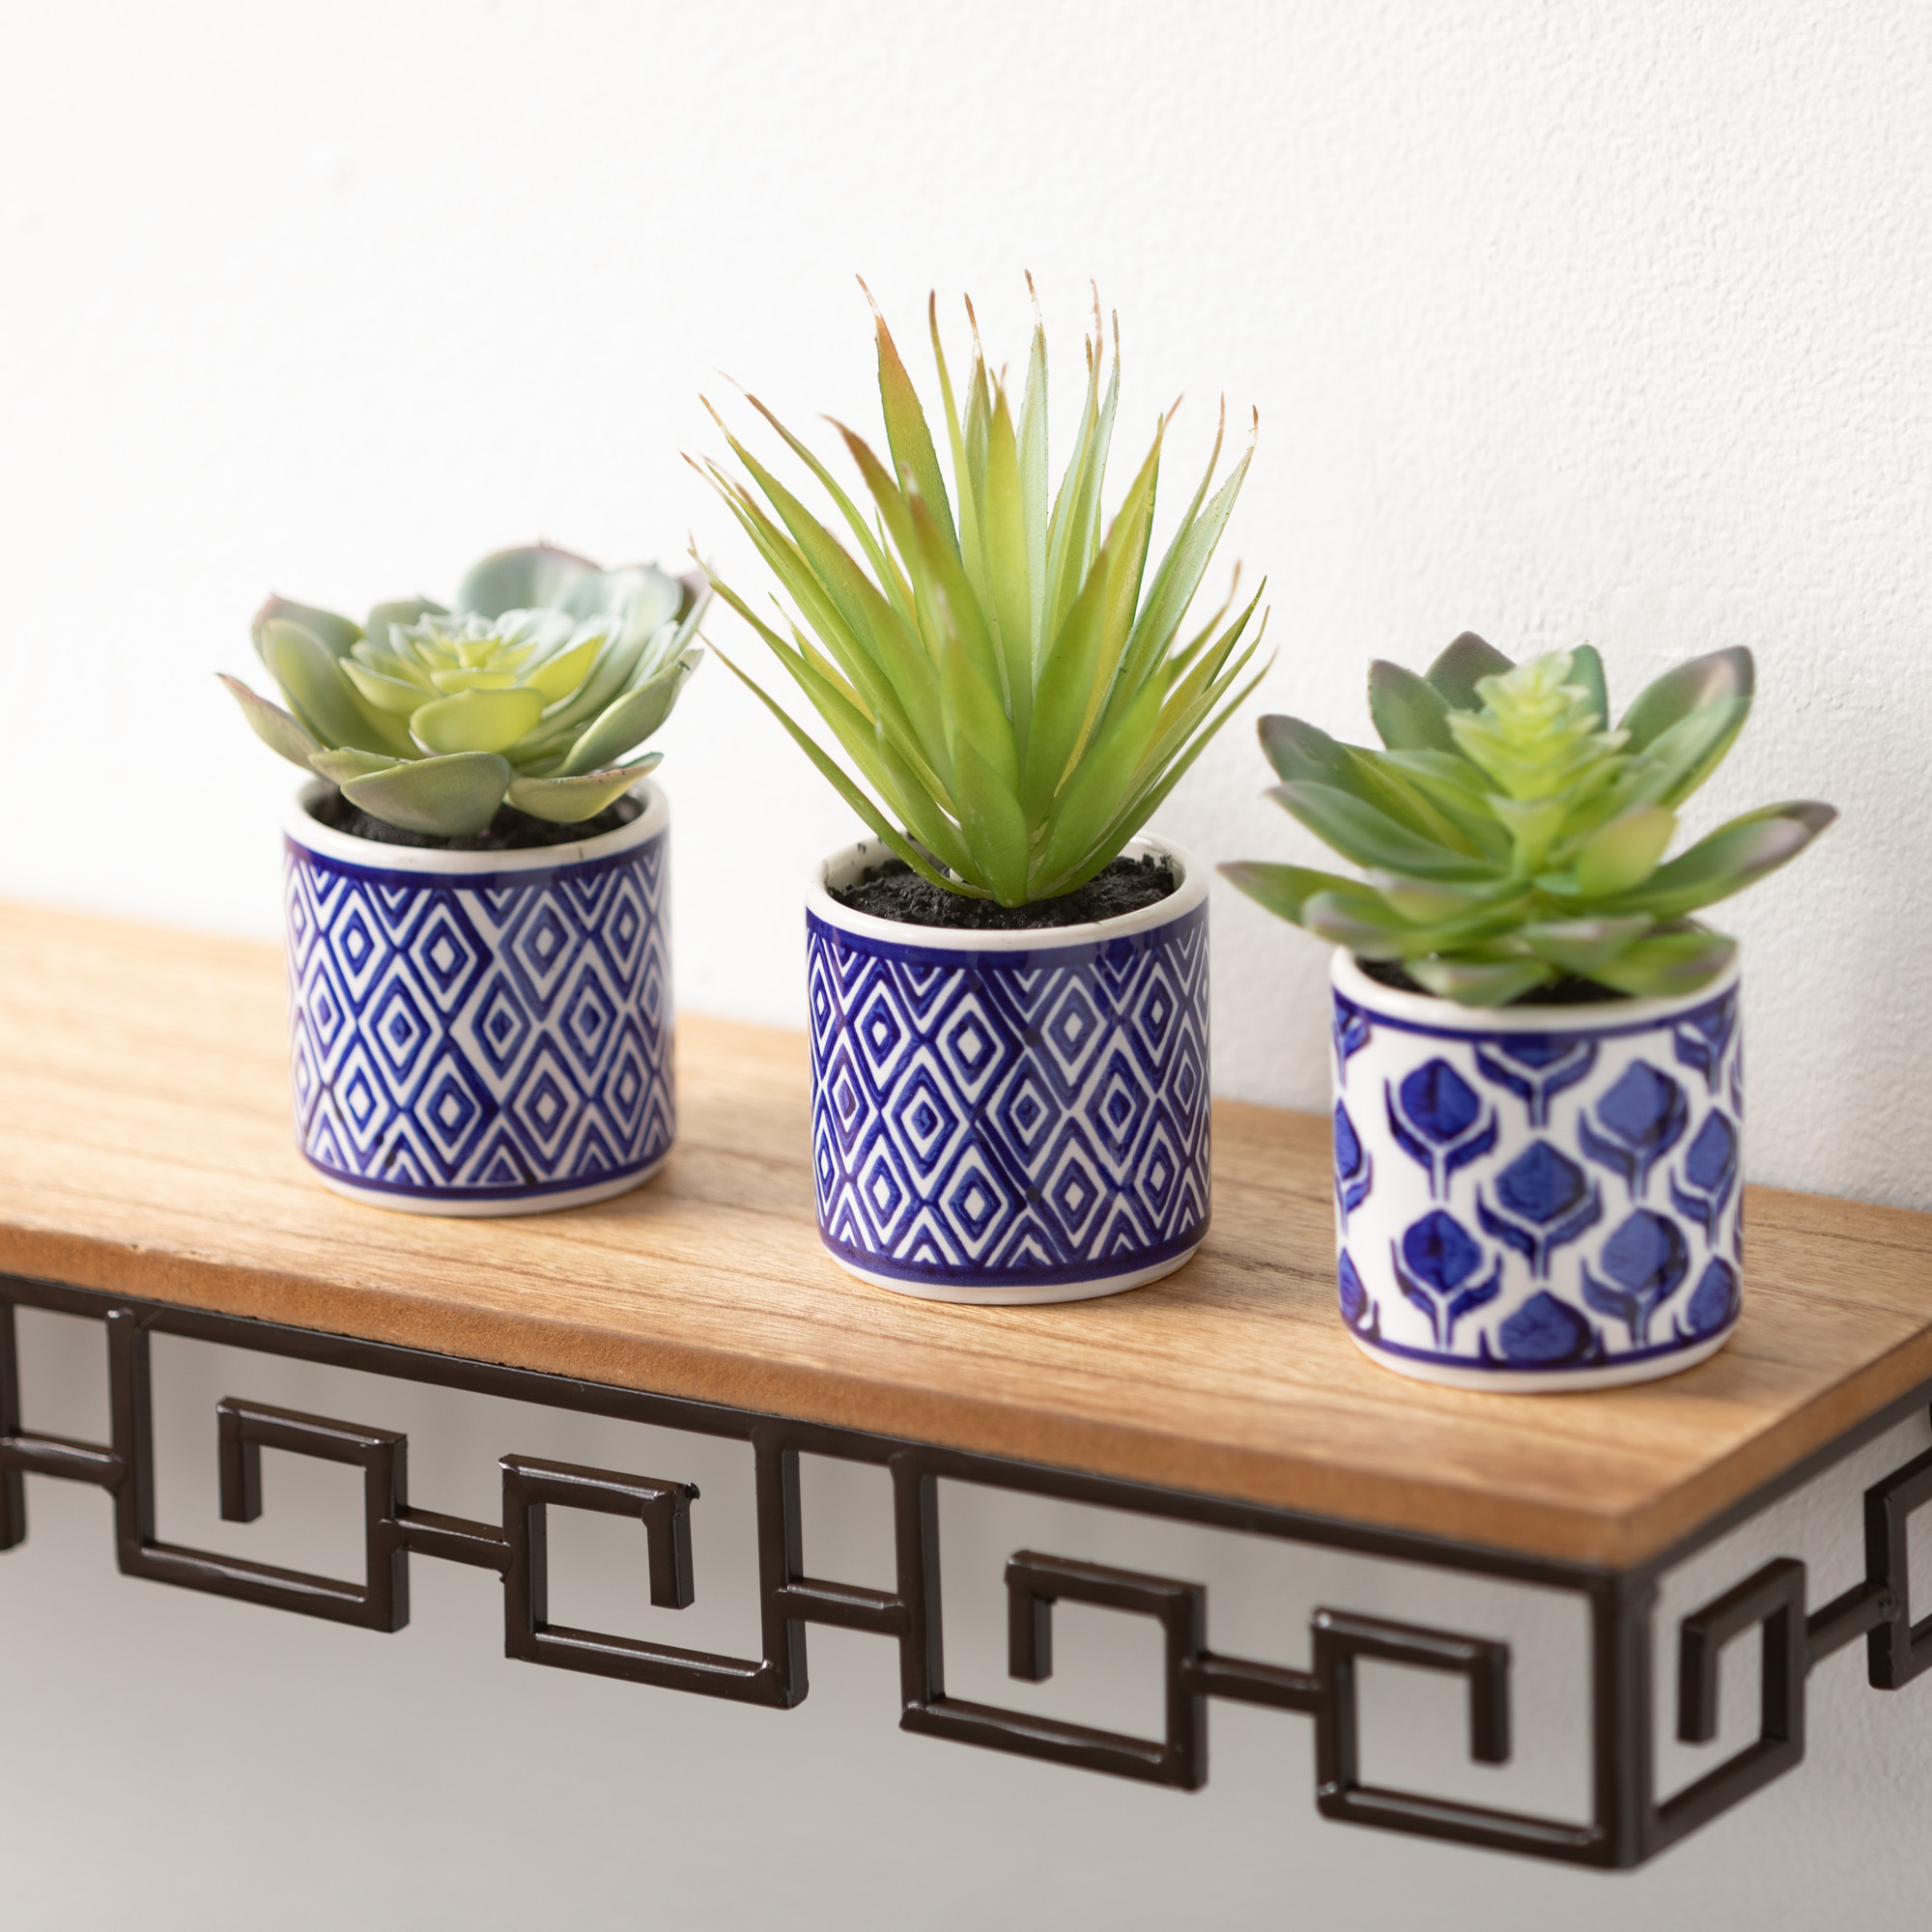 Sullivans Artificial Succulent Trio In Printed Pots Set of 3, 4"H Green - image 3 of 4